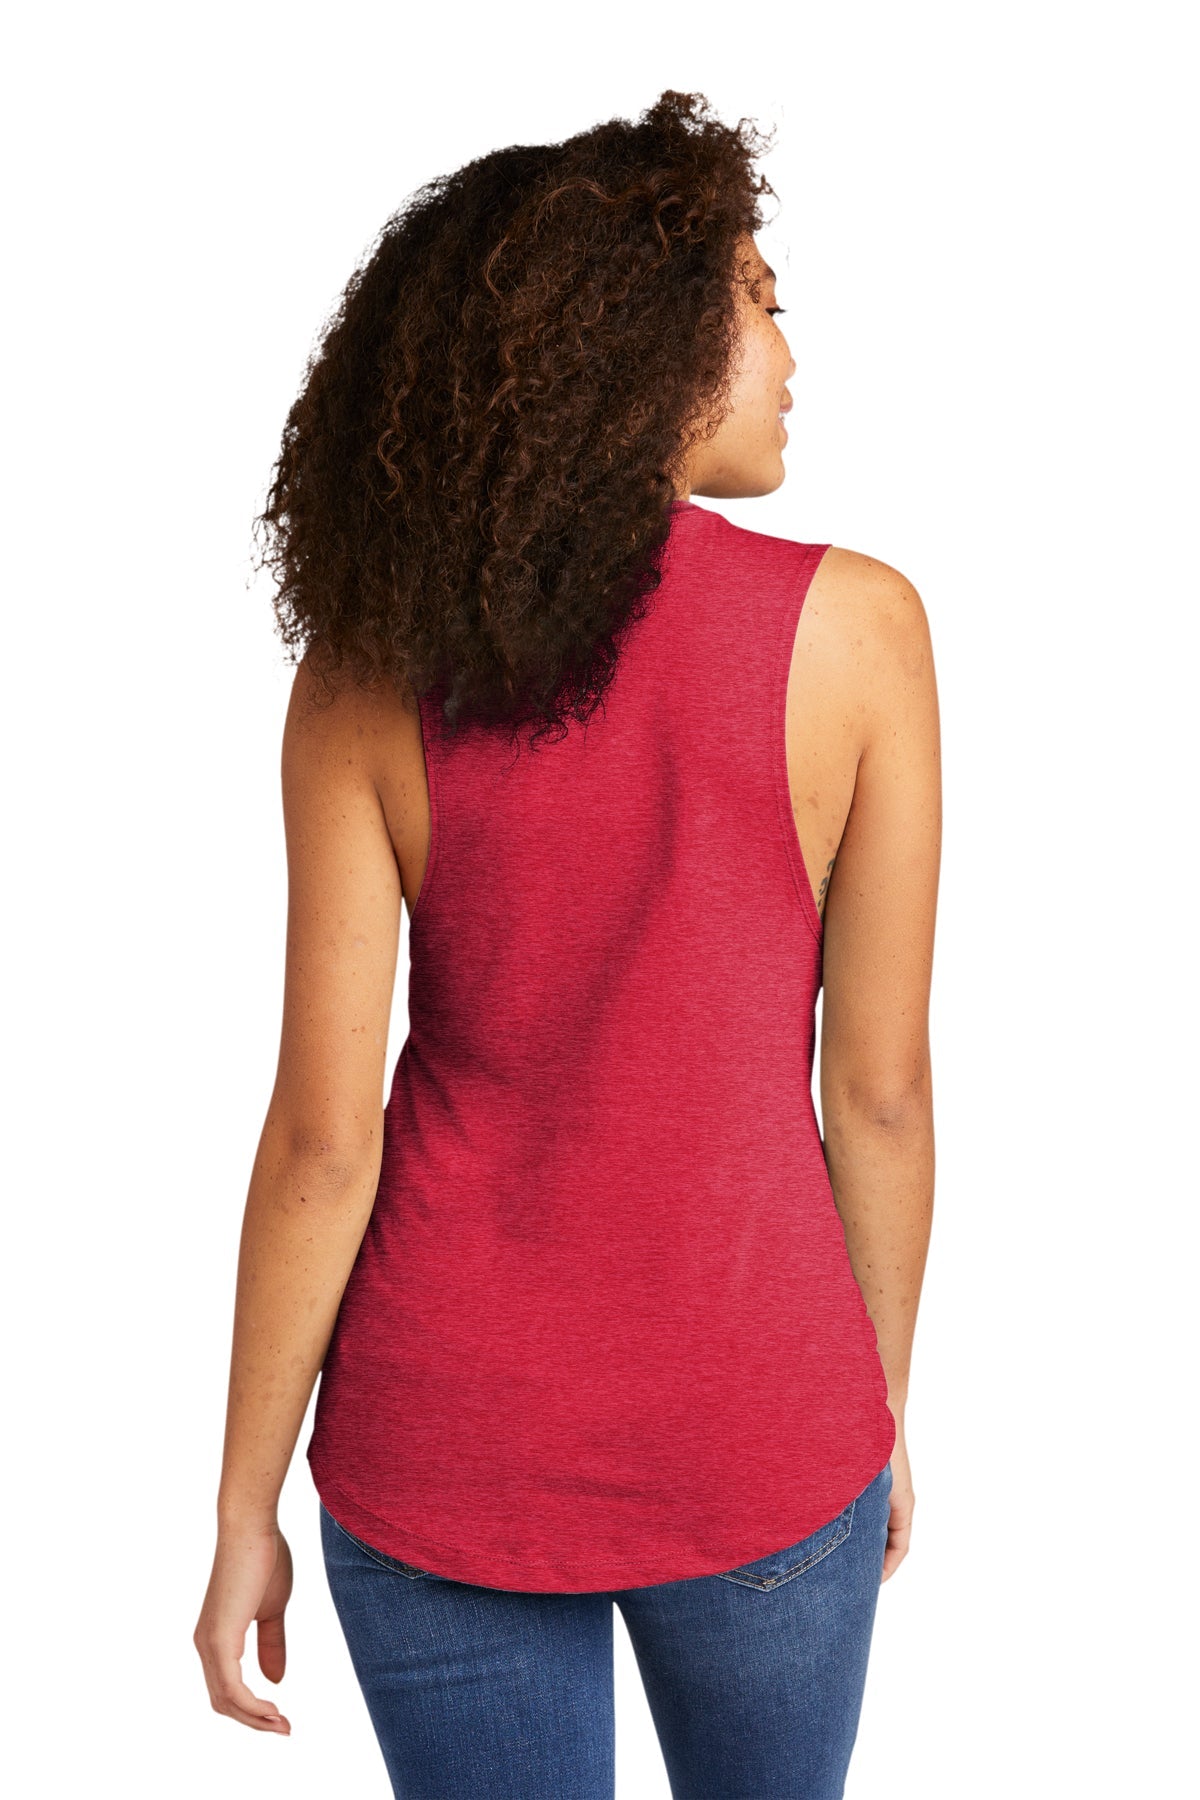 Next Level Women's Festival Customized Tank Tops, Red